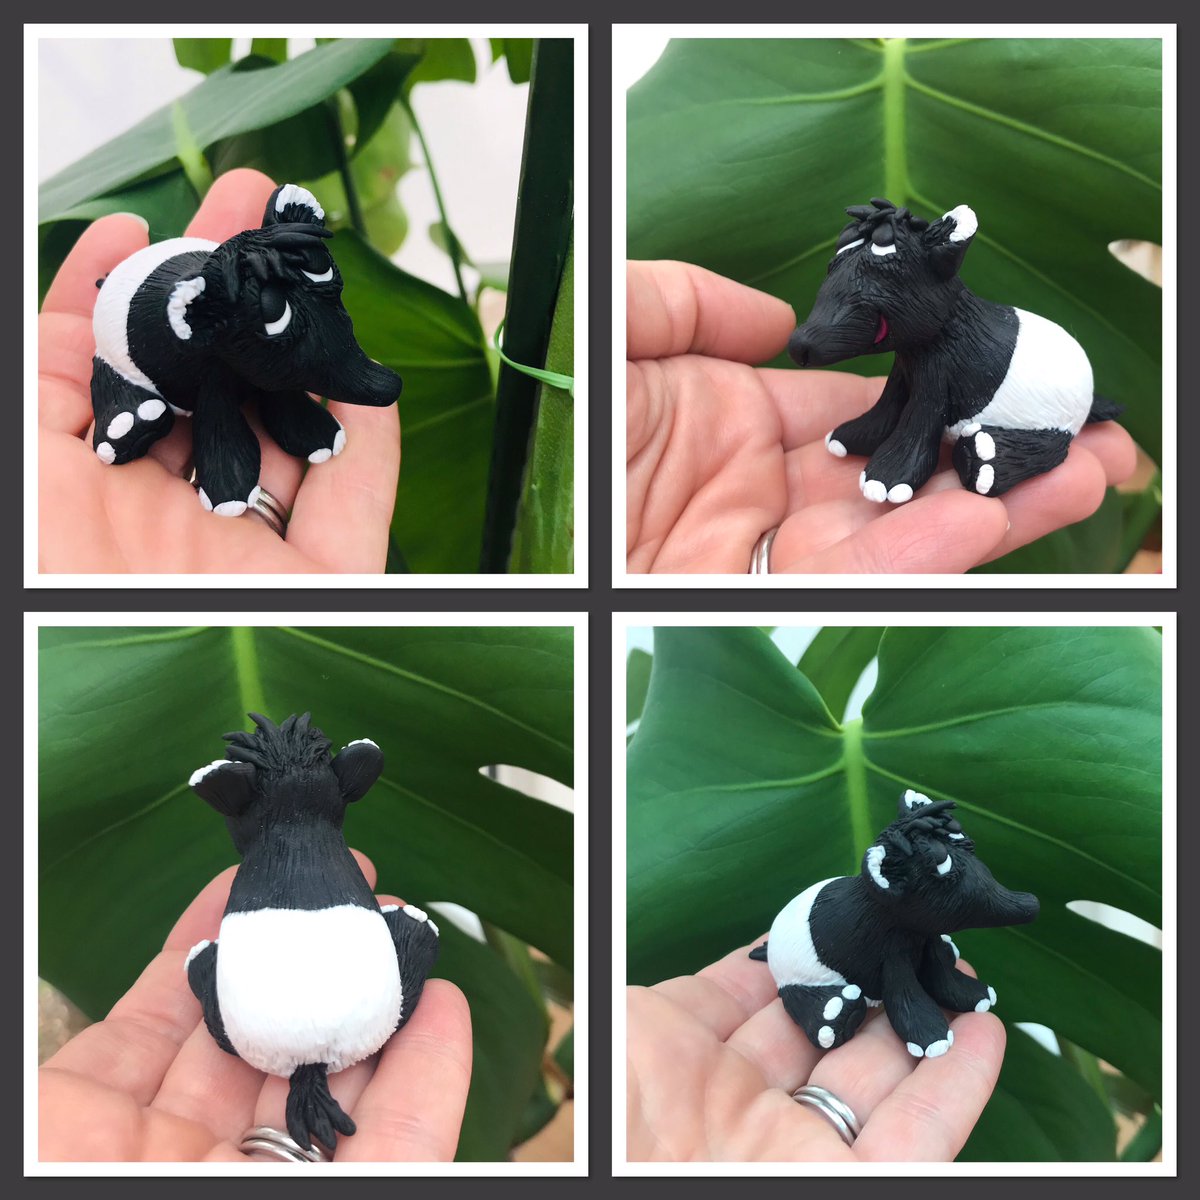 Look who I found hiding in the Swiss cheese plant yesterday! Do you know what he is? … I’ll give you a clue - this isn’t their usual habitat! 😂 #MHHSBD #Earlybiz #polymerclay #exoticanimals #justforfun